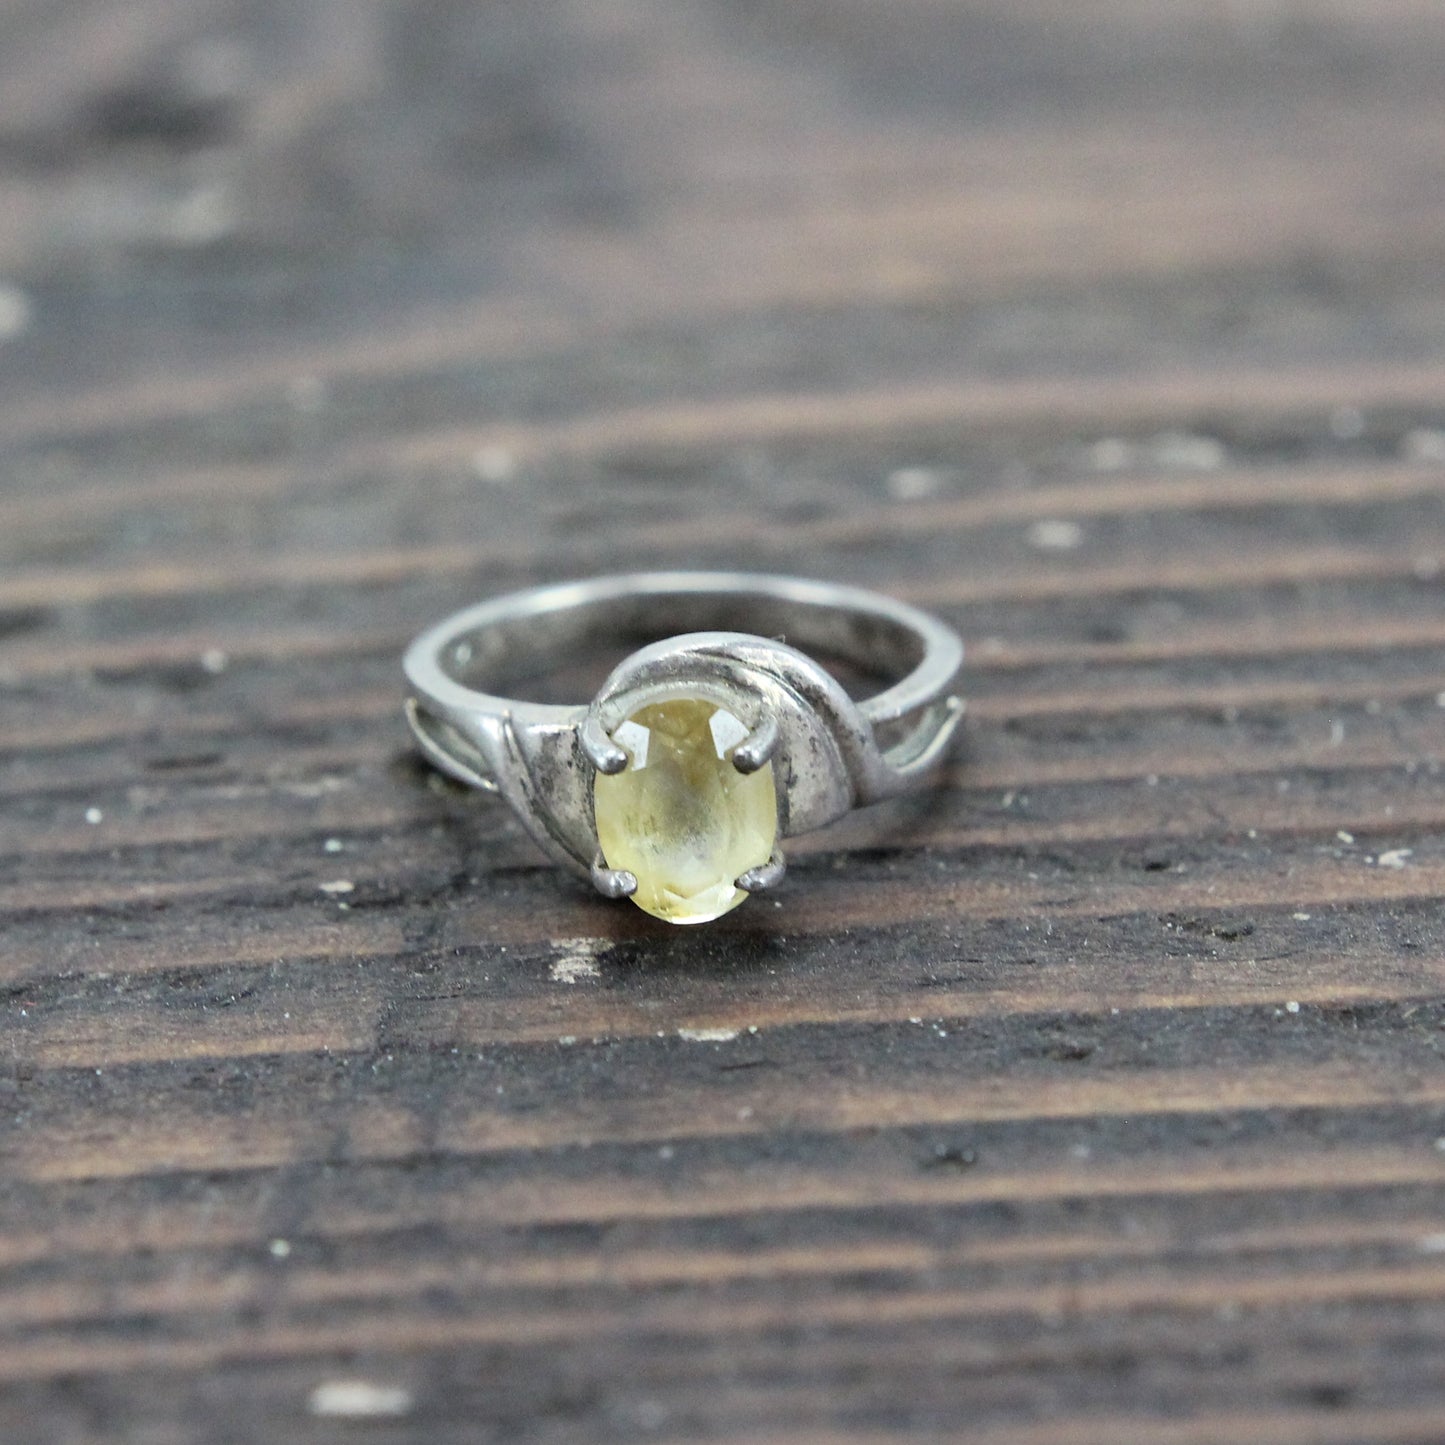 Sterling Silver Ring with Yellow Translucent Stone - Size 6.25